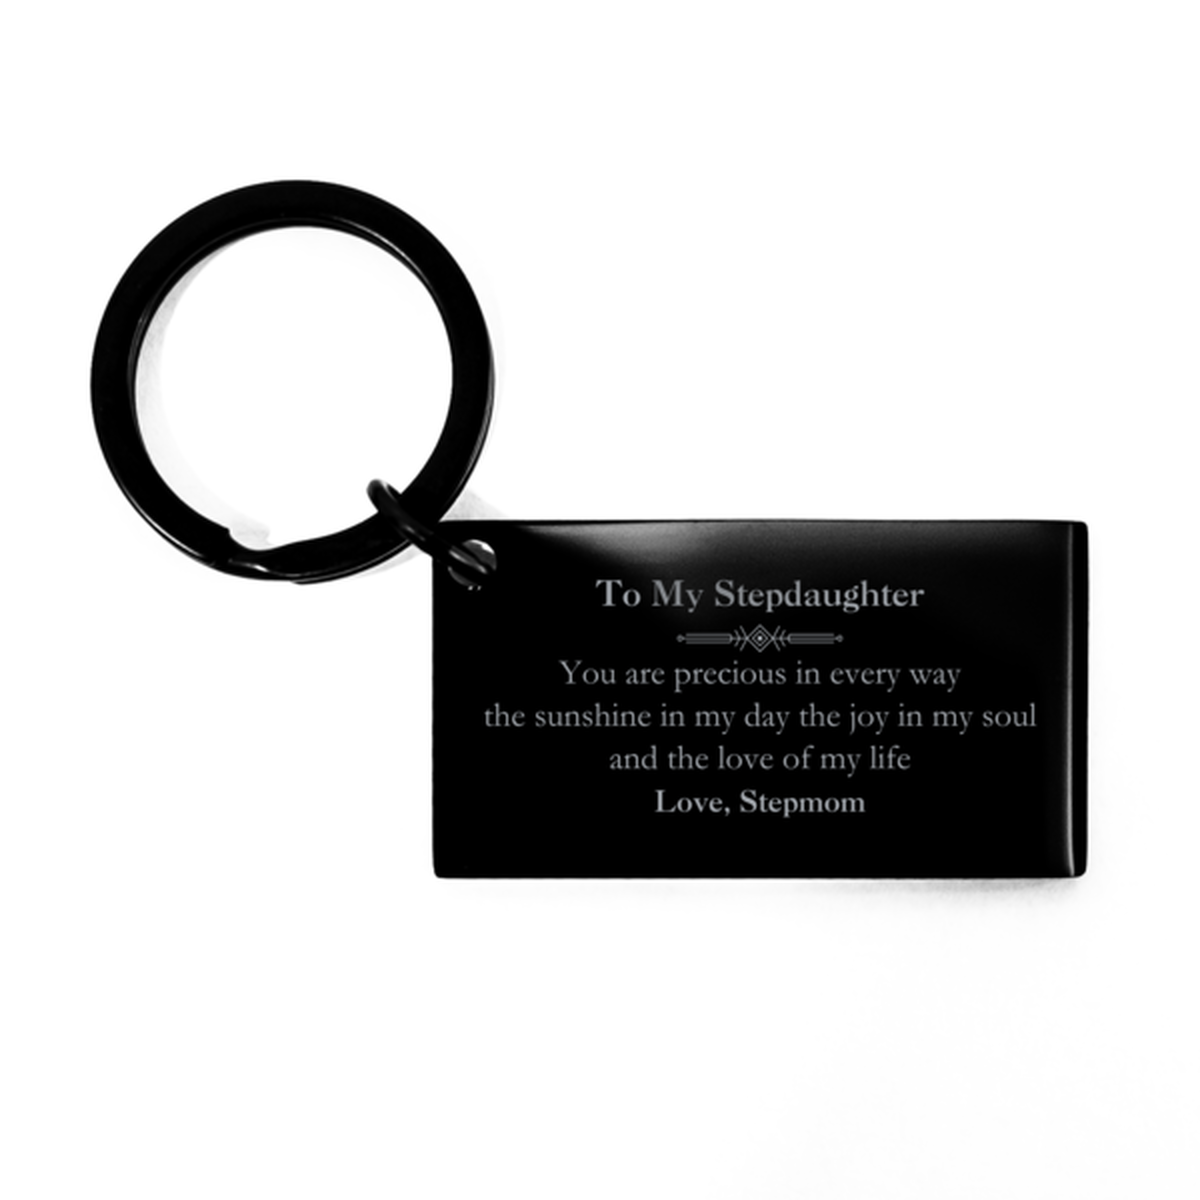 Graduation Gifts for Stepdaughter Keychain Present from Stepmom, Christmas Stepdaughter Birthday Gifts Stepdaughter You are precious in every way the sunshine in my day. Love, Stepmom